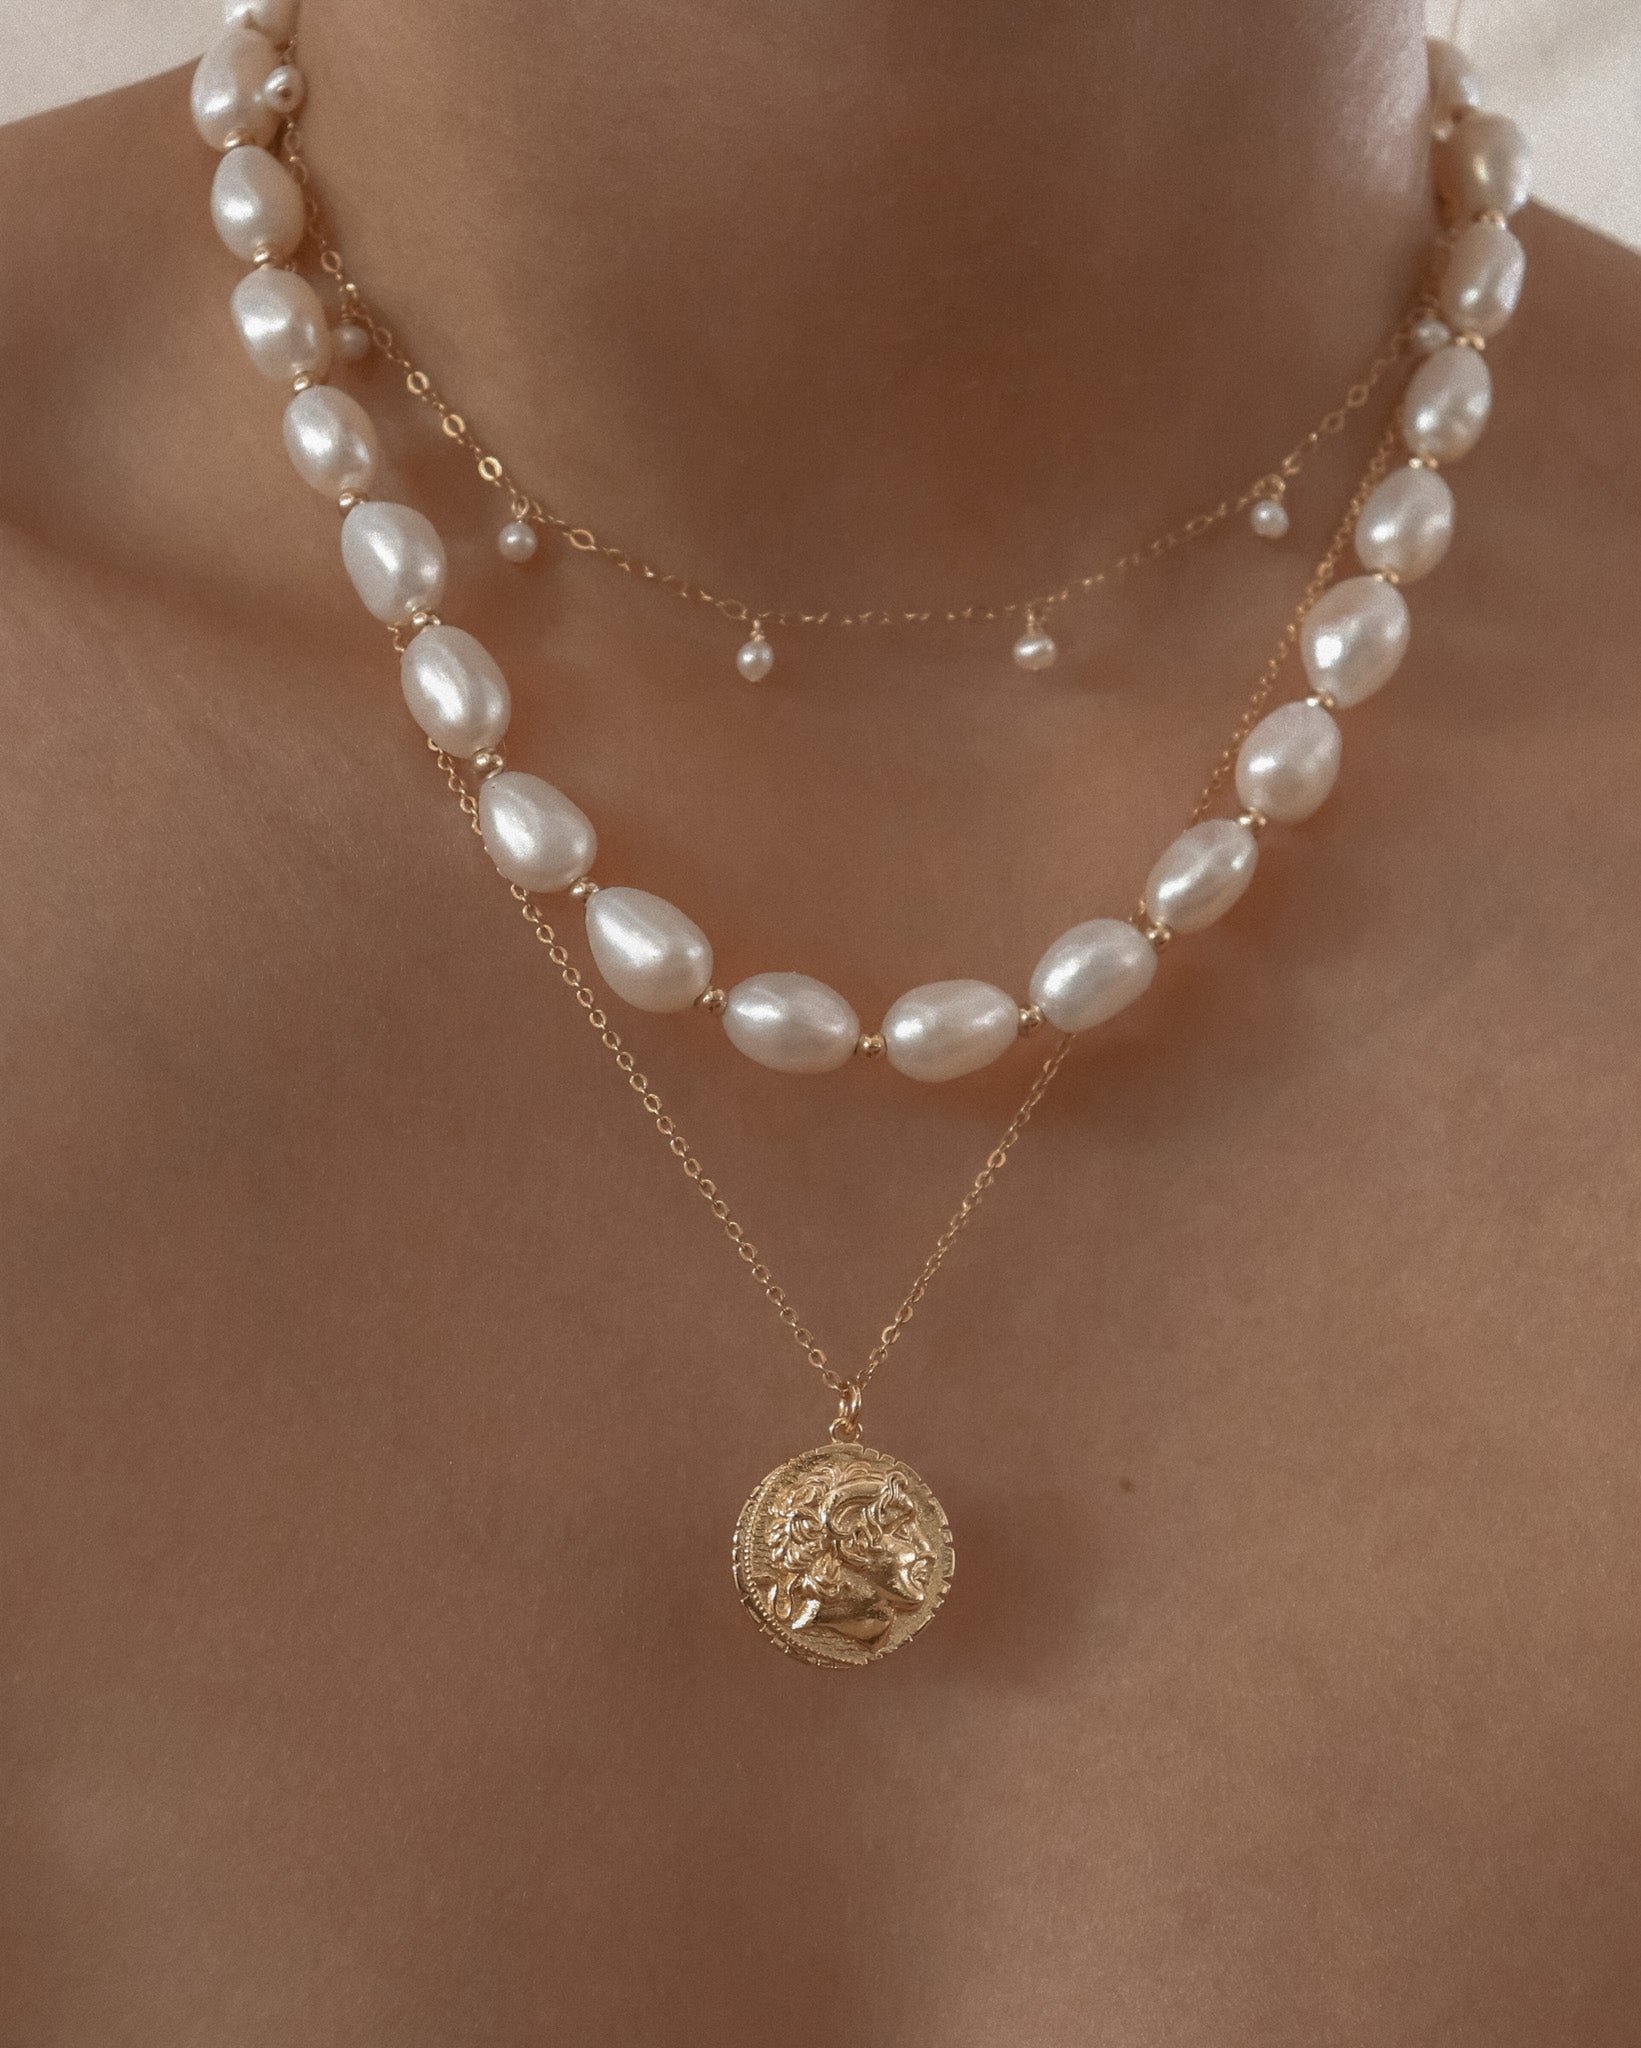 Pearl Necklaces hand crafted in Ireland with real freshwater pearls